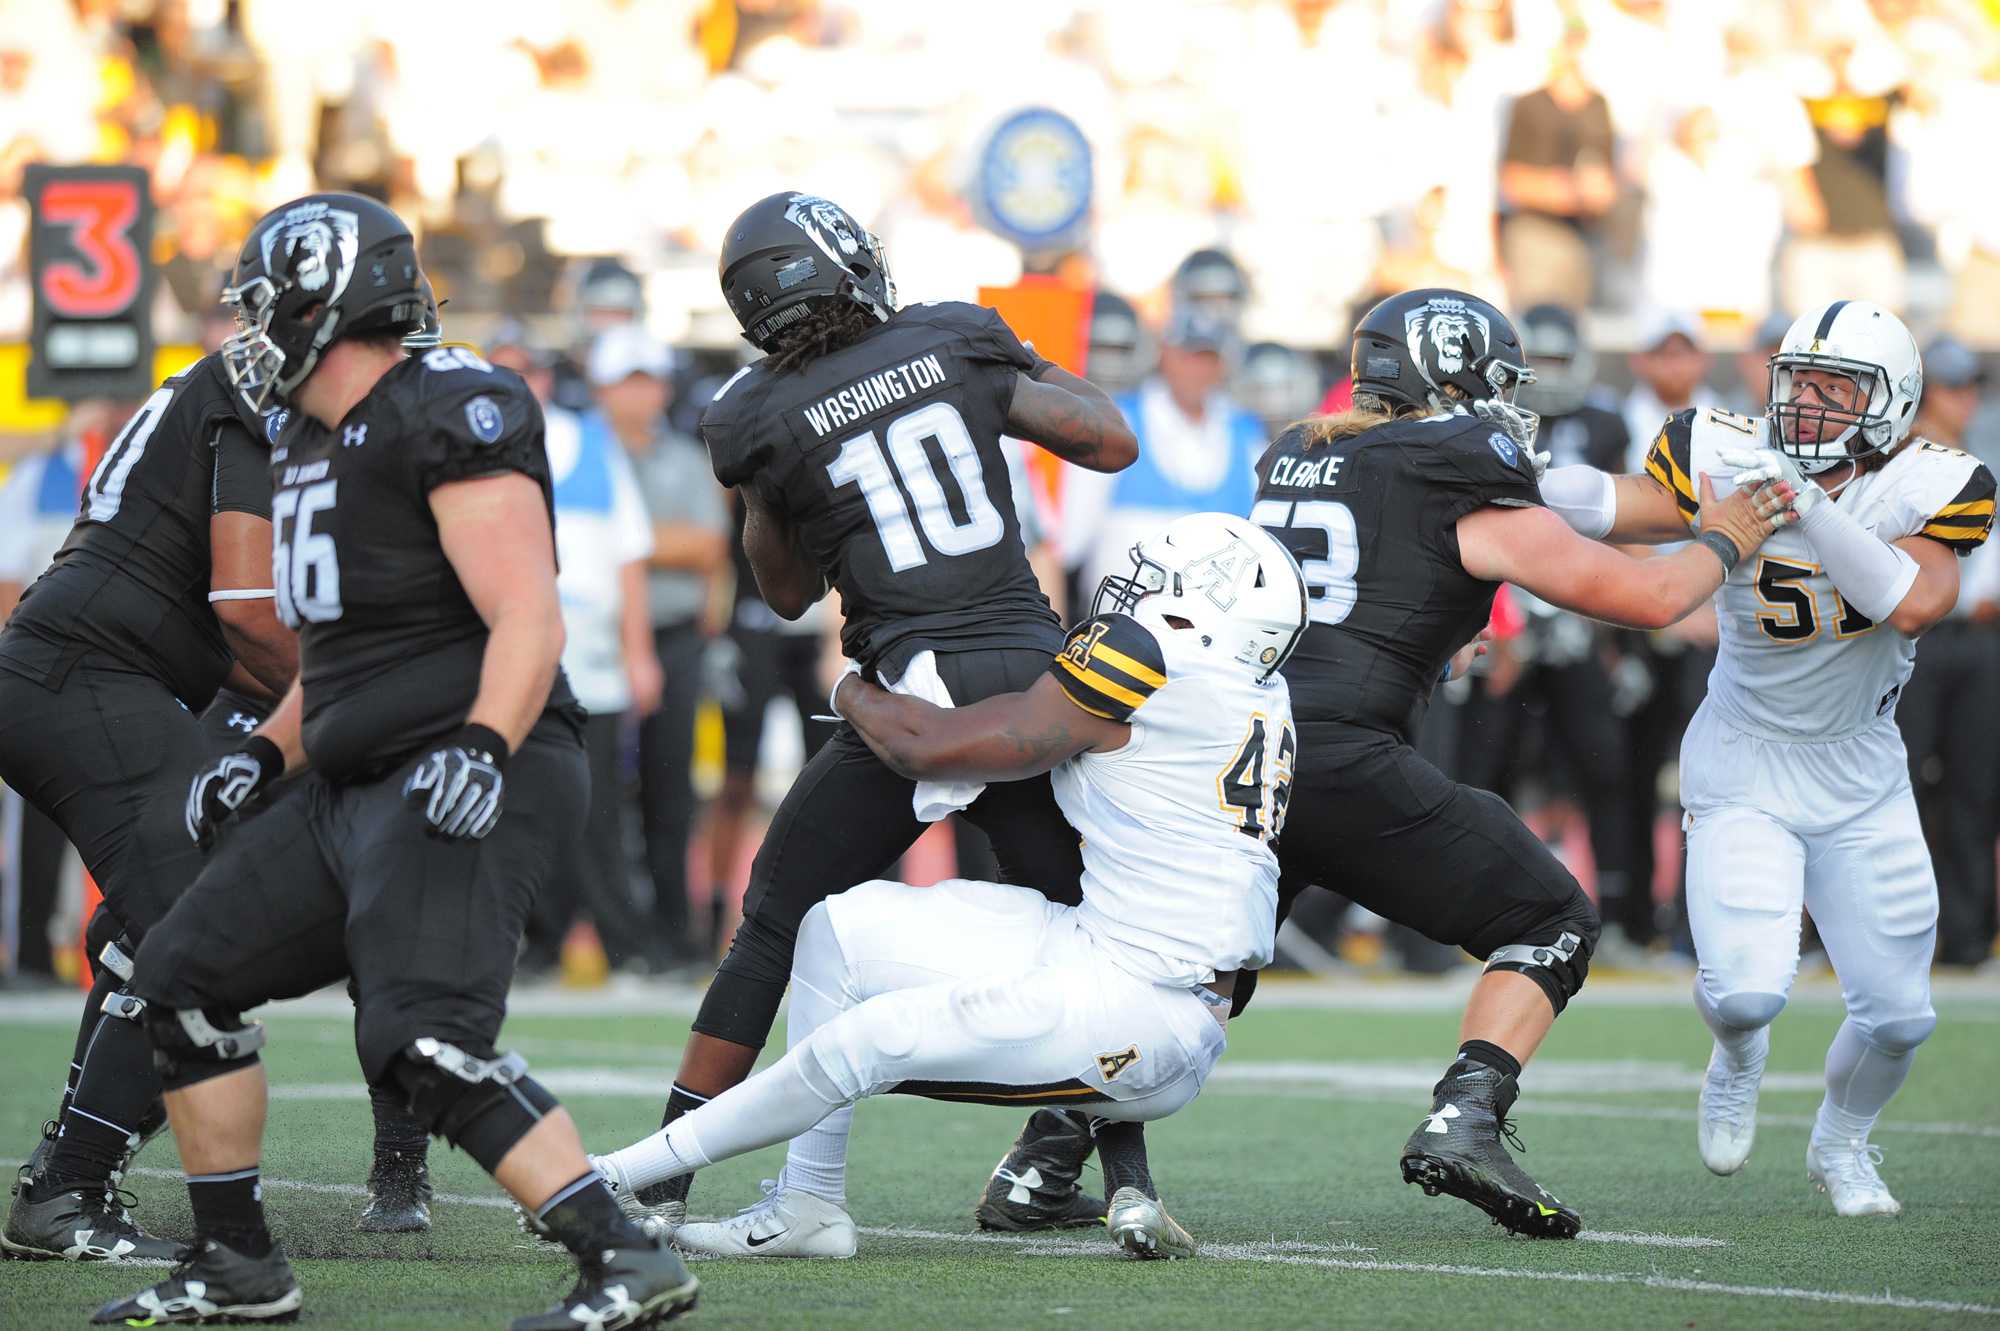 Sims shining on App State defense